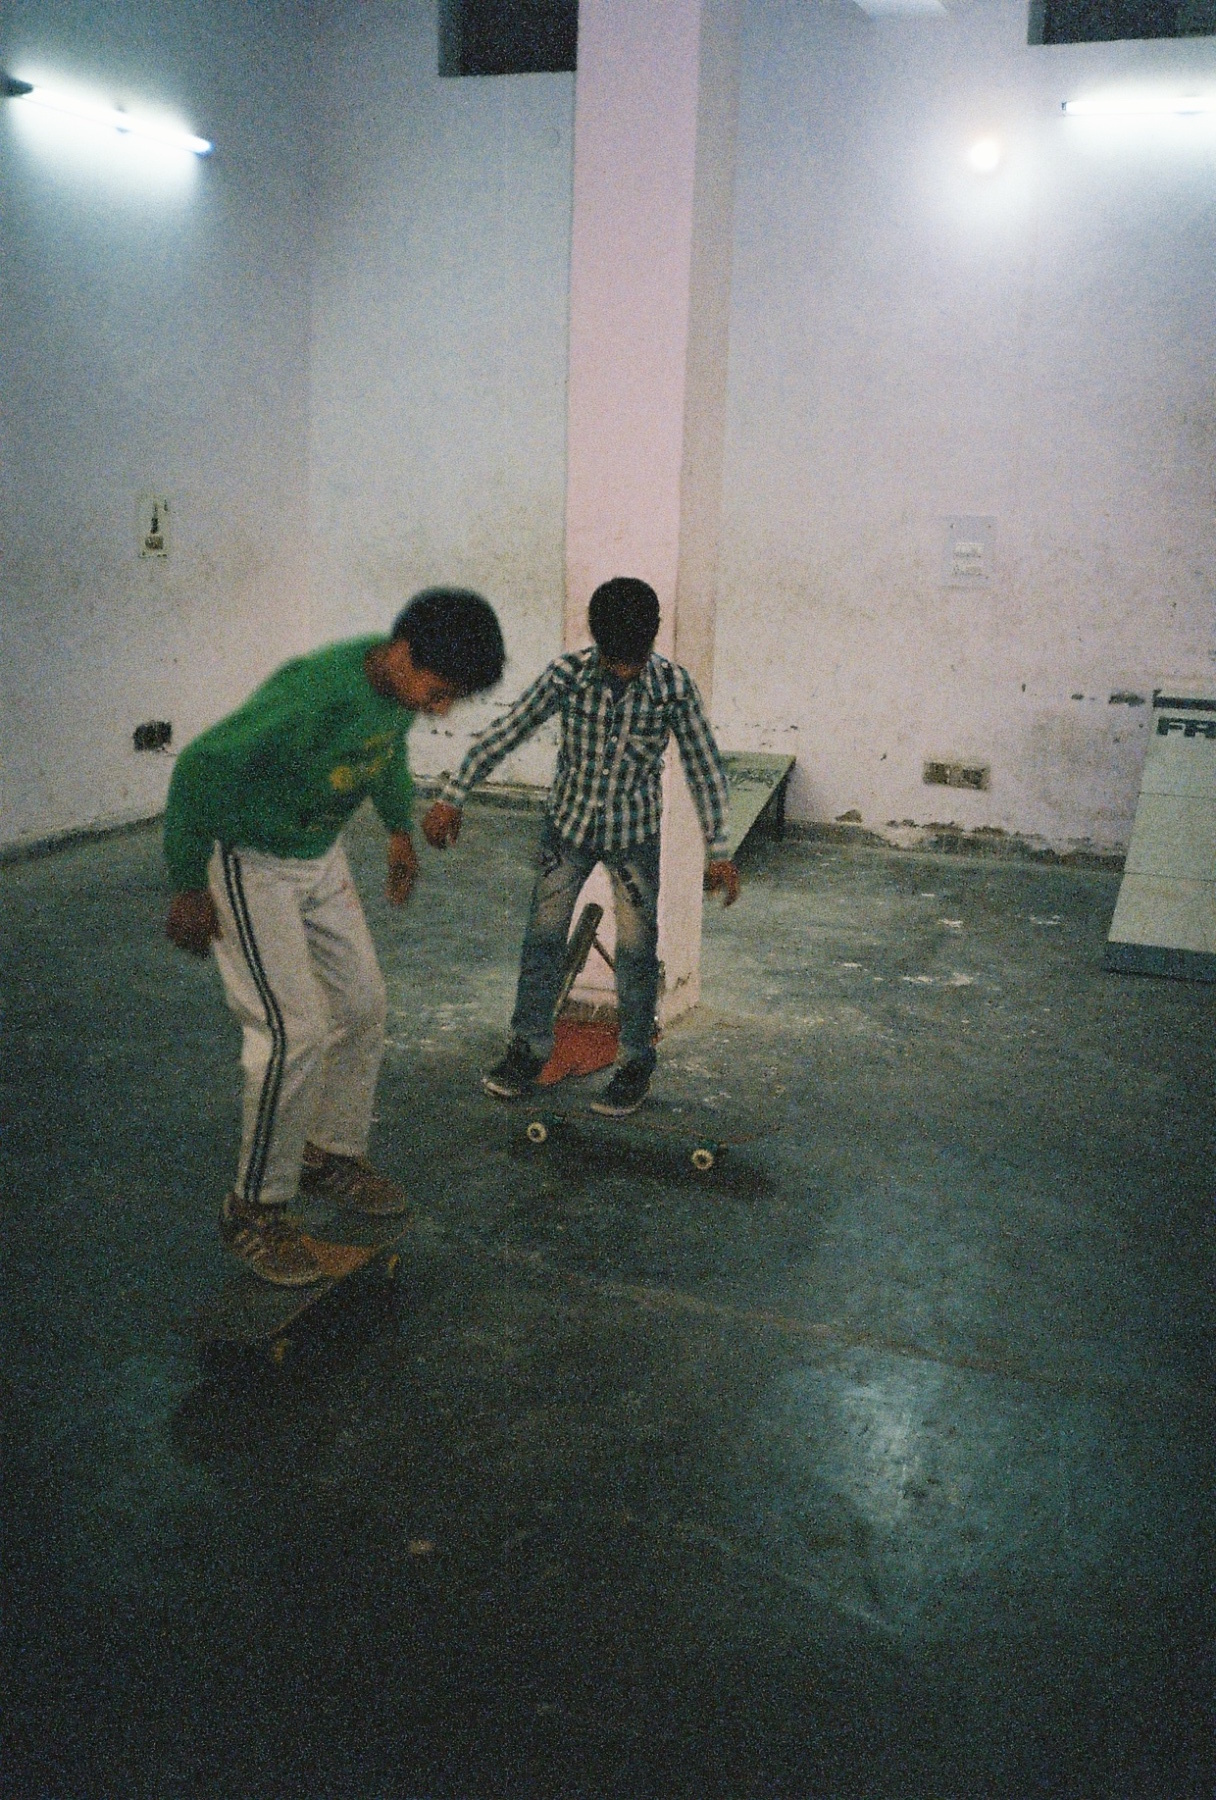 KIDS SKATING IN A MAKE SHIFT PARK IN A WAREHOUSE BASEMENT IN THE OUTER SUBURBS OF NEW DELHI.jpg